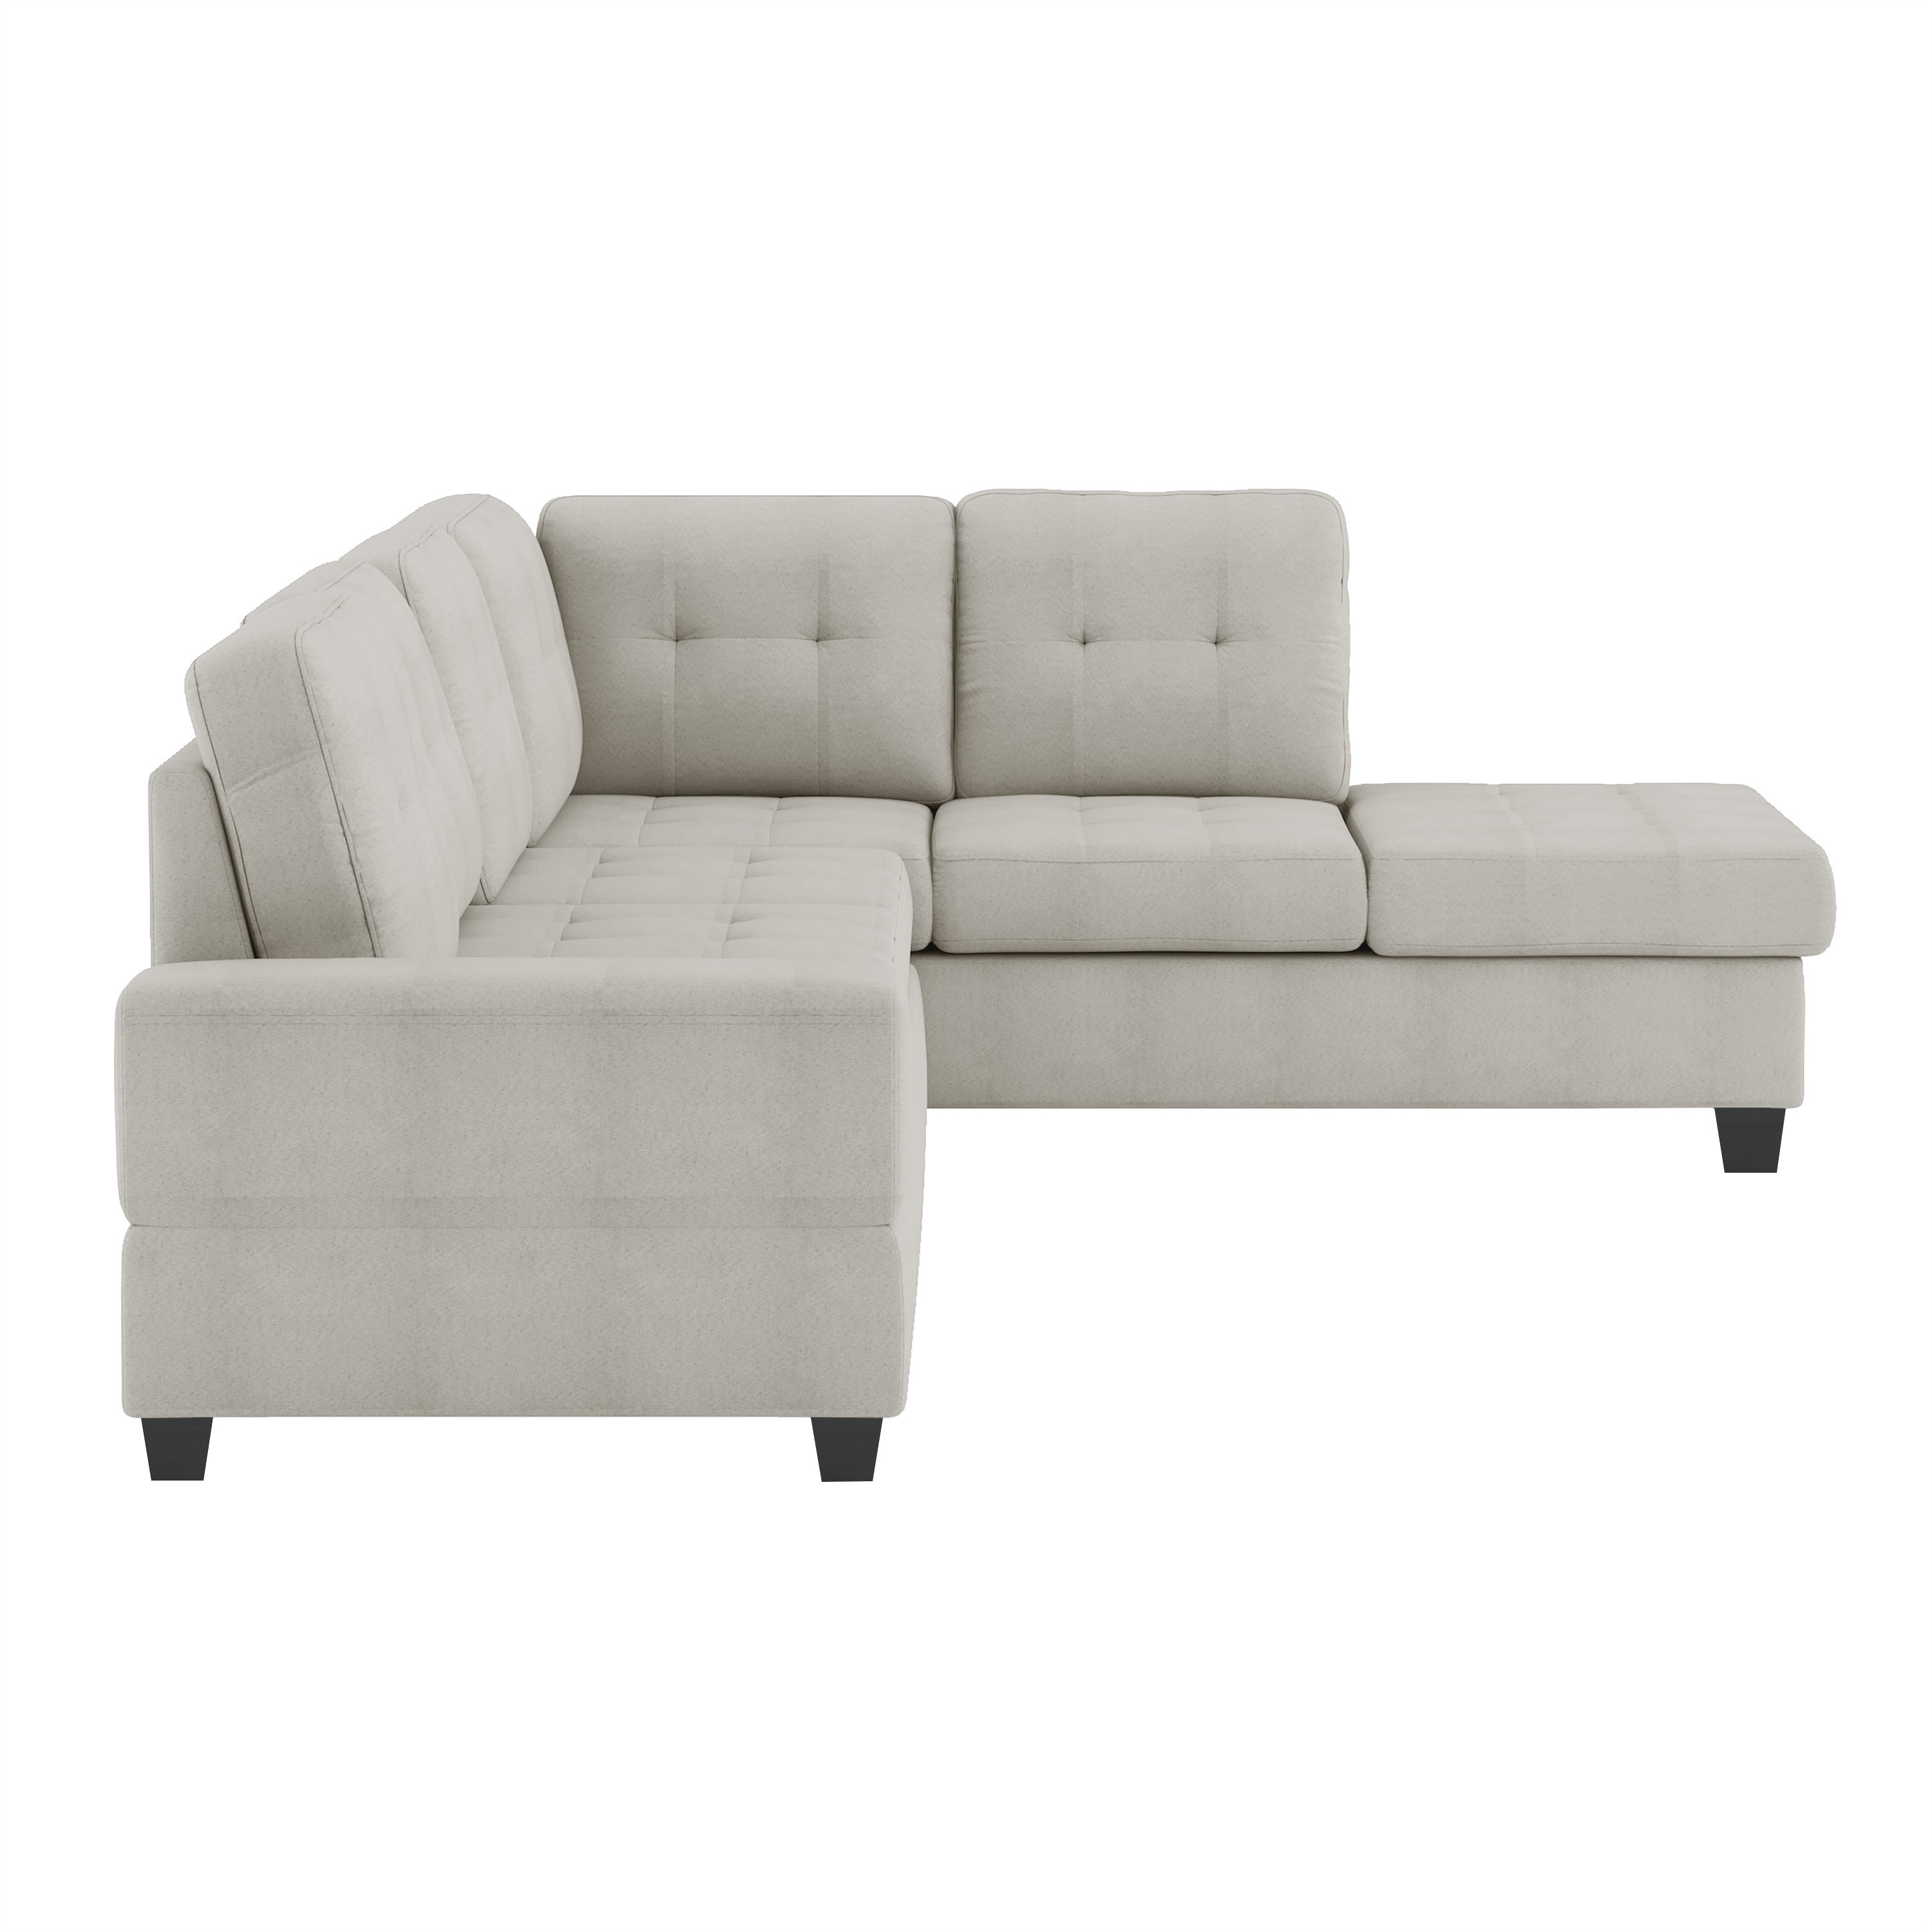 Maxine 3-piece Reversible Sectional w/ Ottoman in Gray